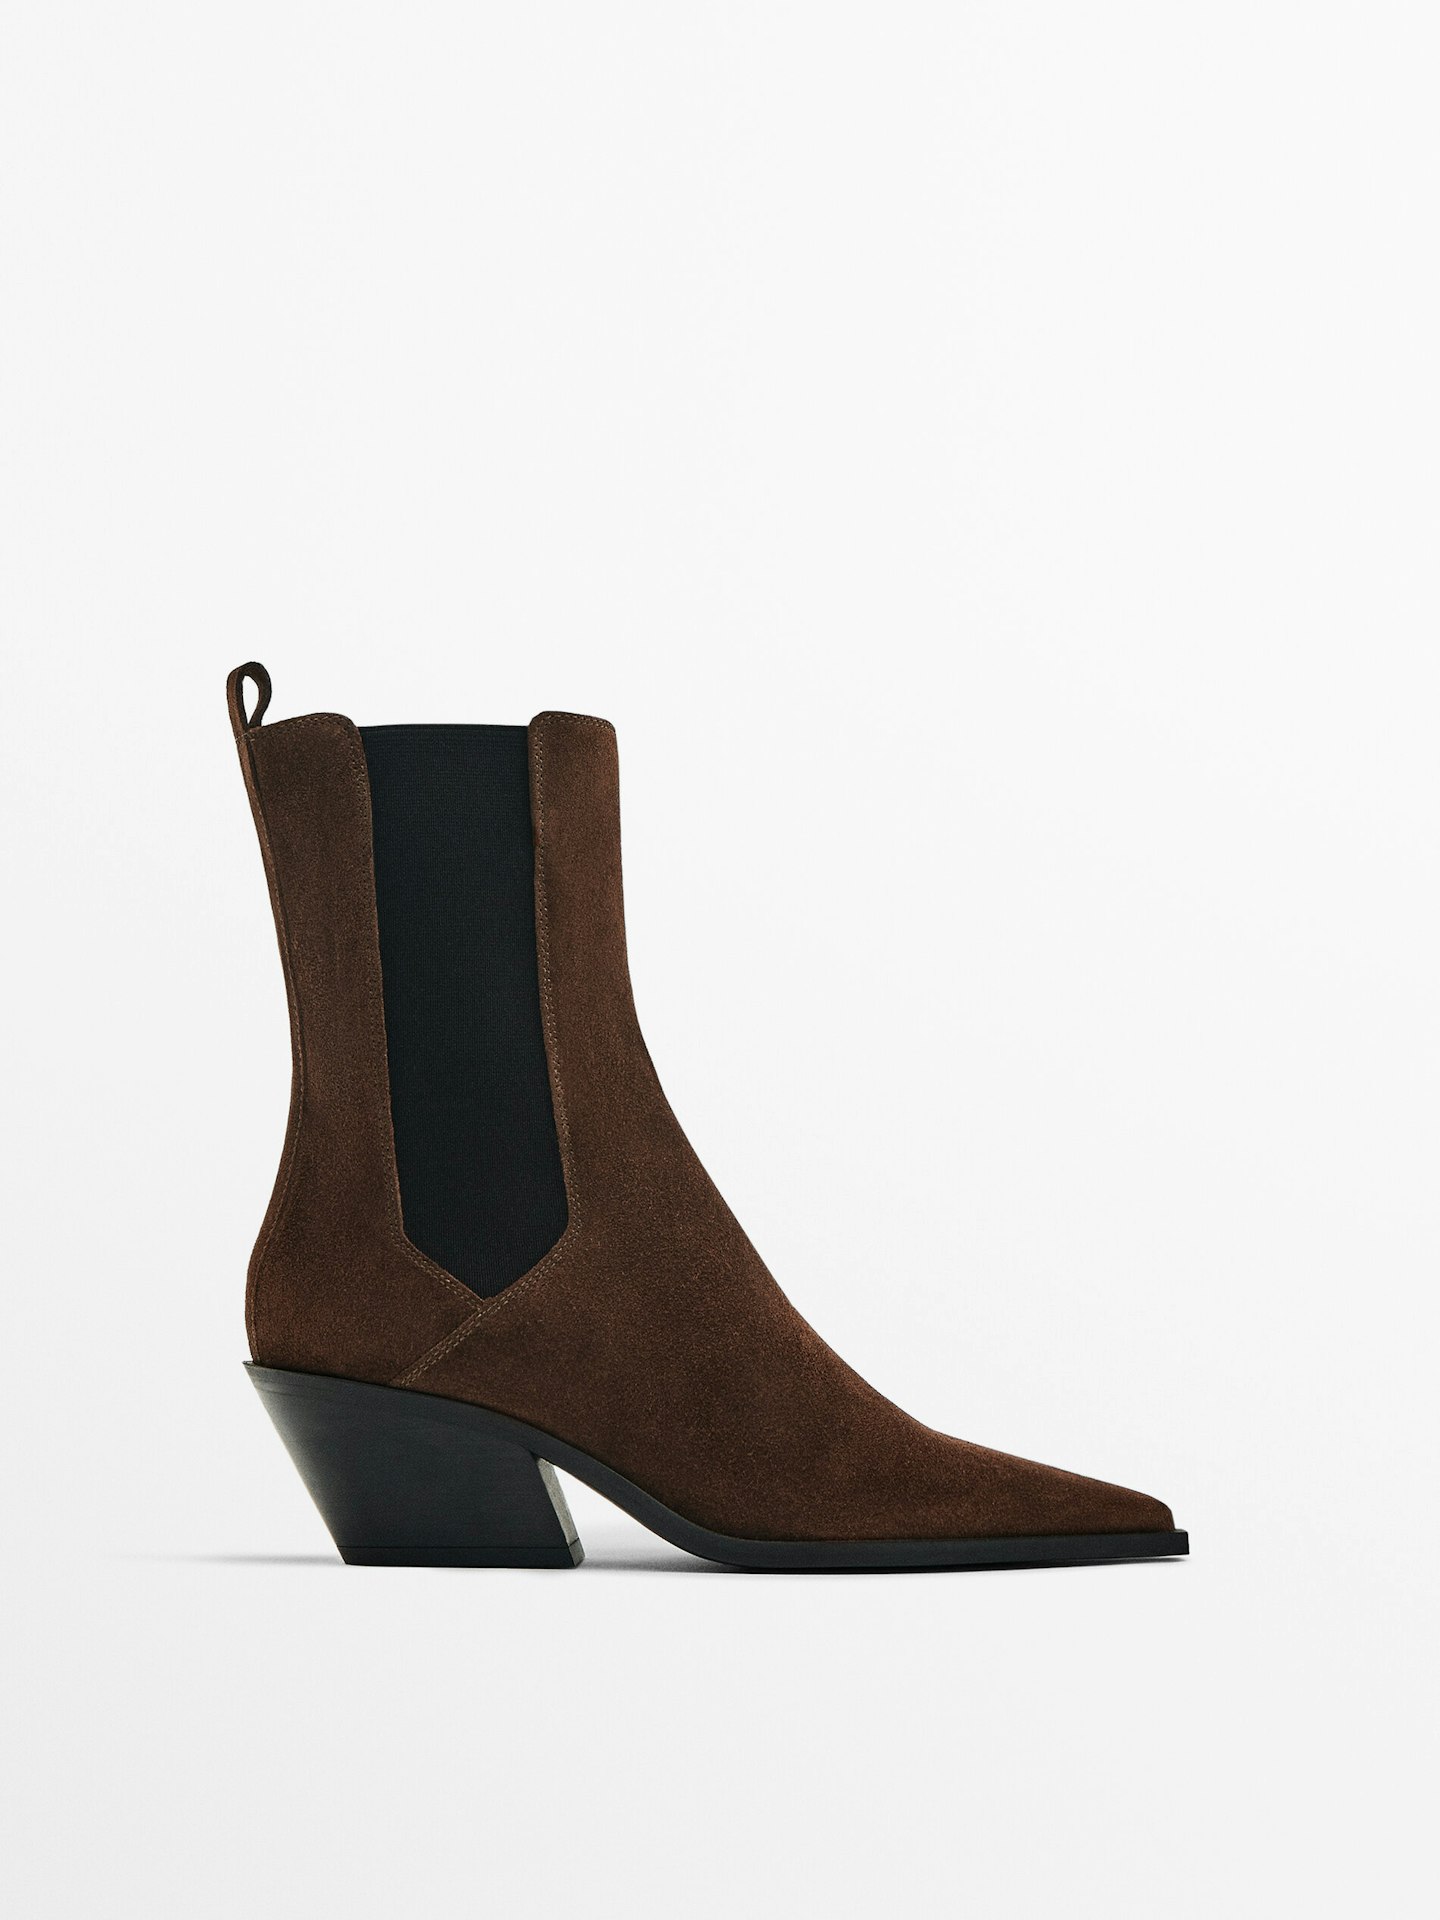 Massimo Dutti, Split Suede Heeled Ankle Boots